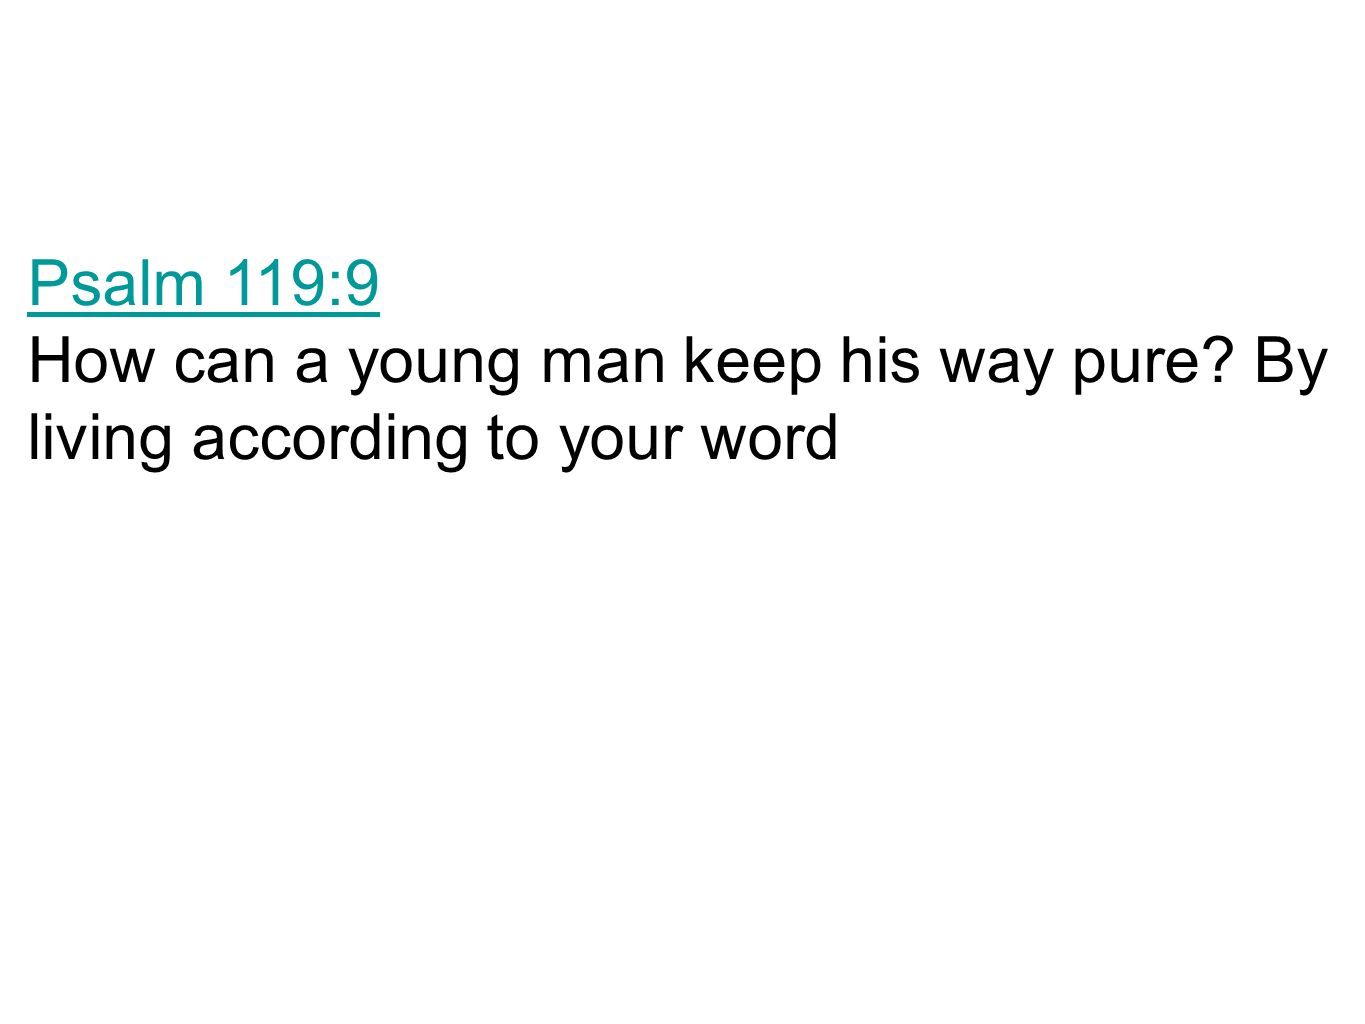 Psalm 119:9 How can a young man keep his way pure By living according to your word